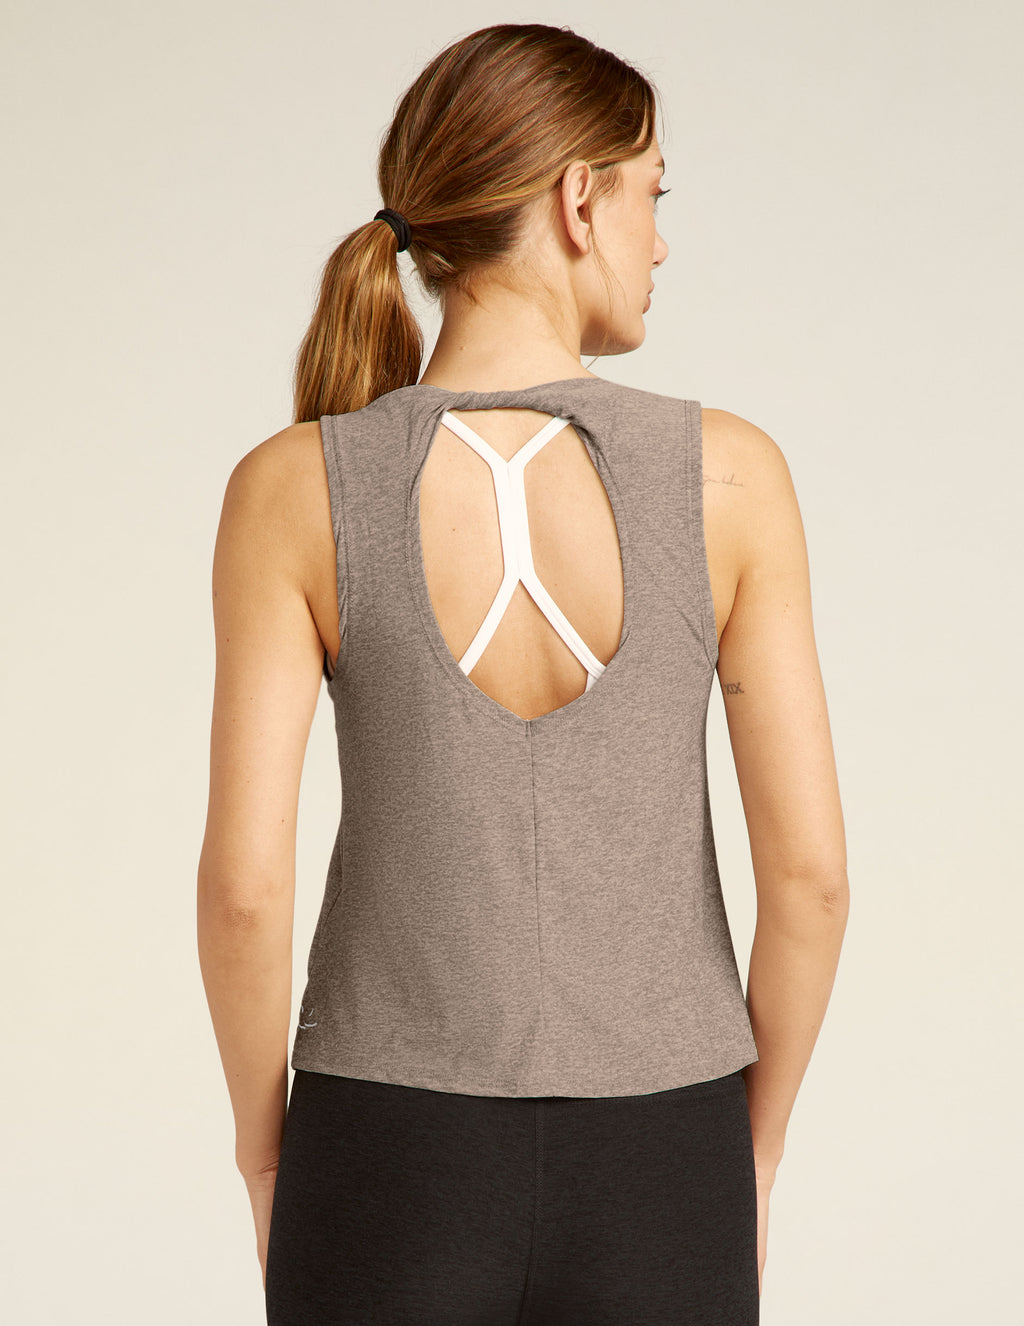 NEW prAna HEATHER GREY SWAY YOGA WORKOUT TANK TOP BUILT IN SPORTS